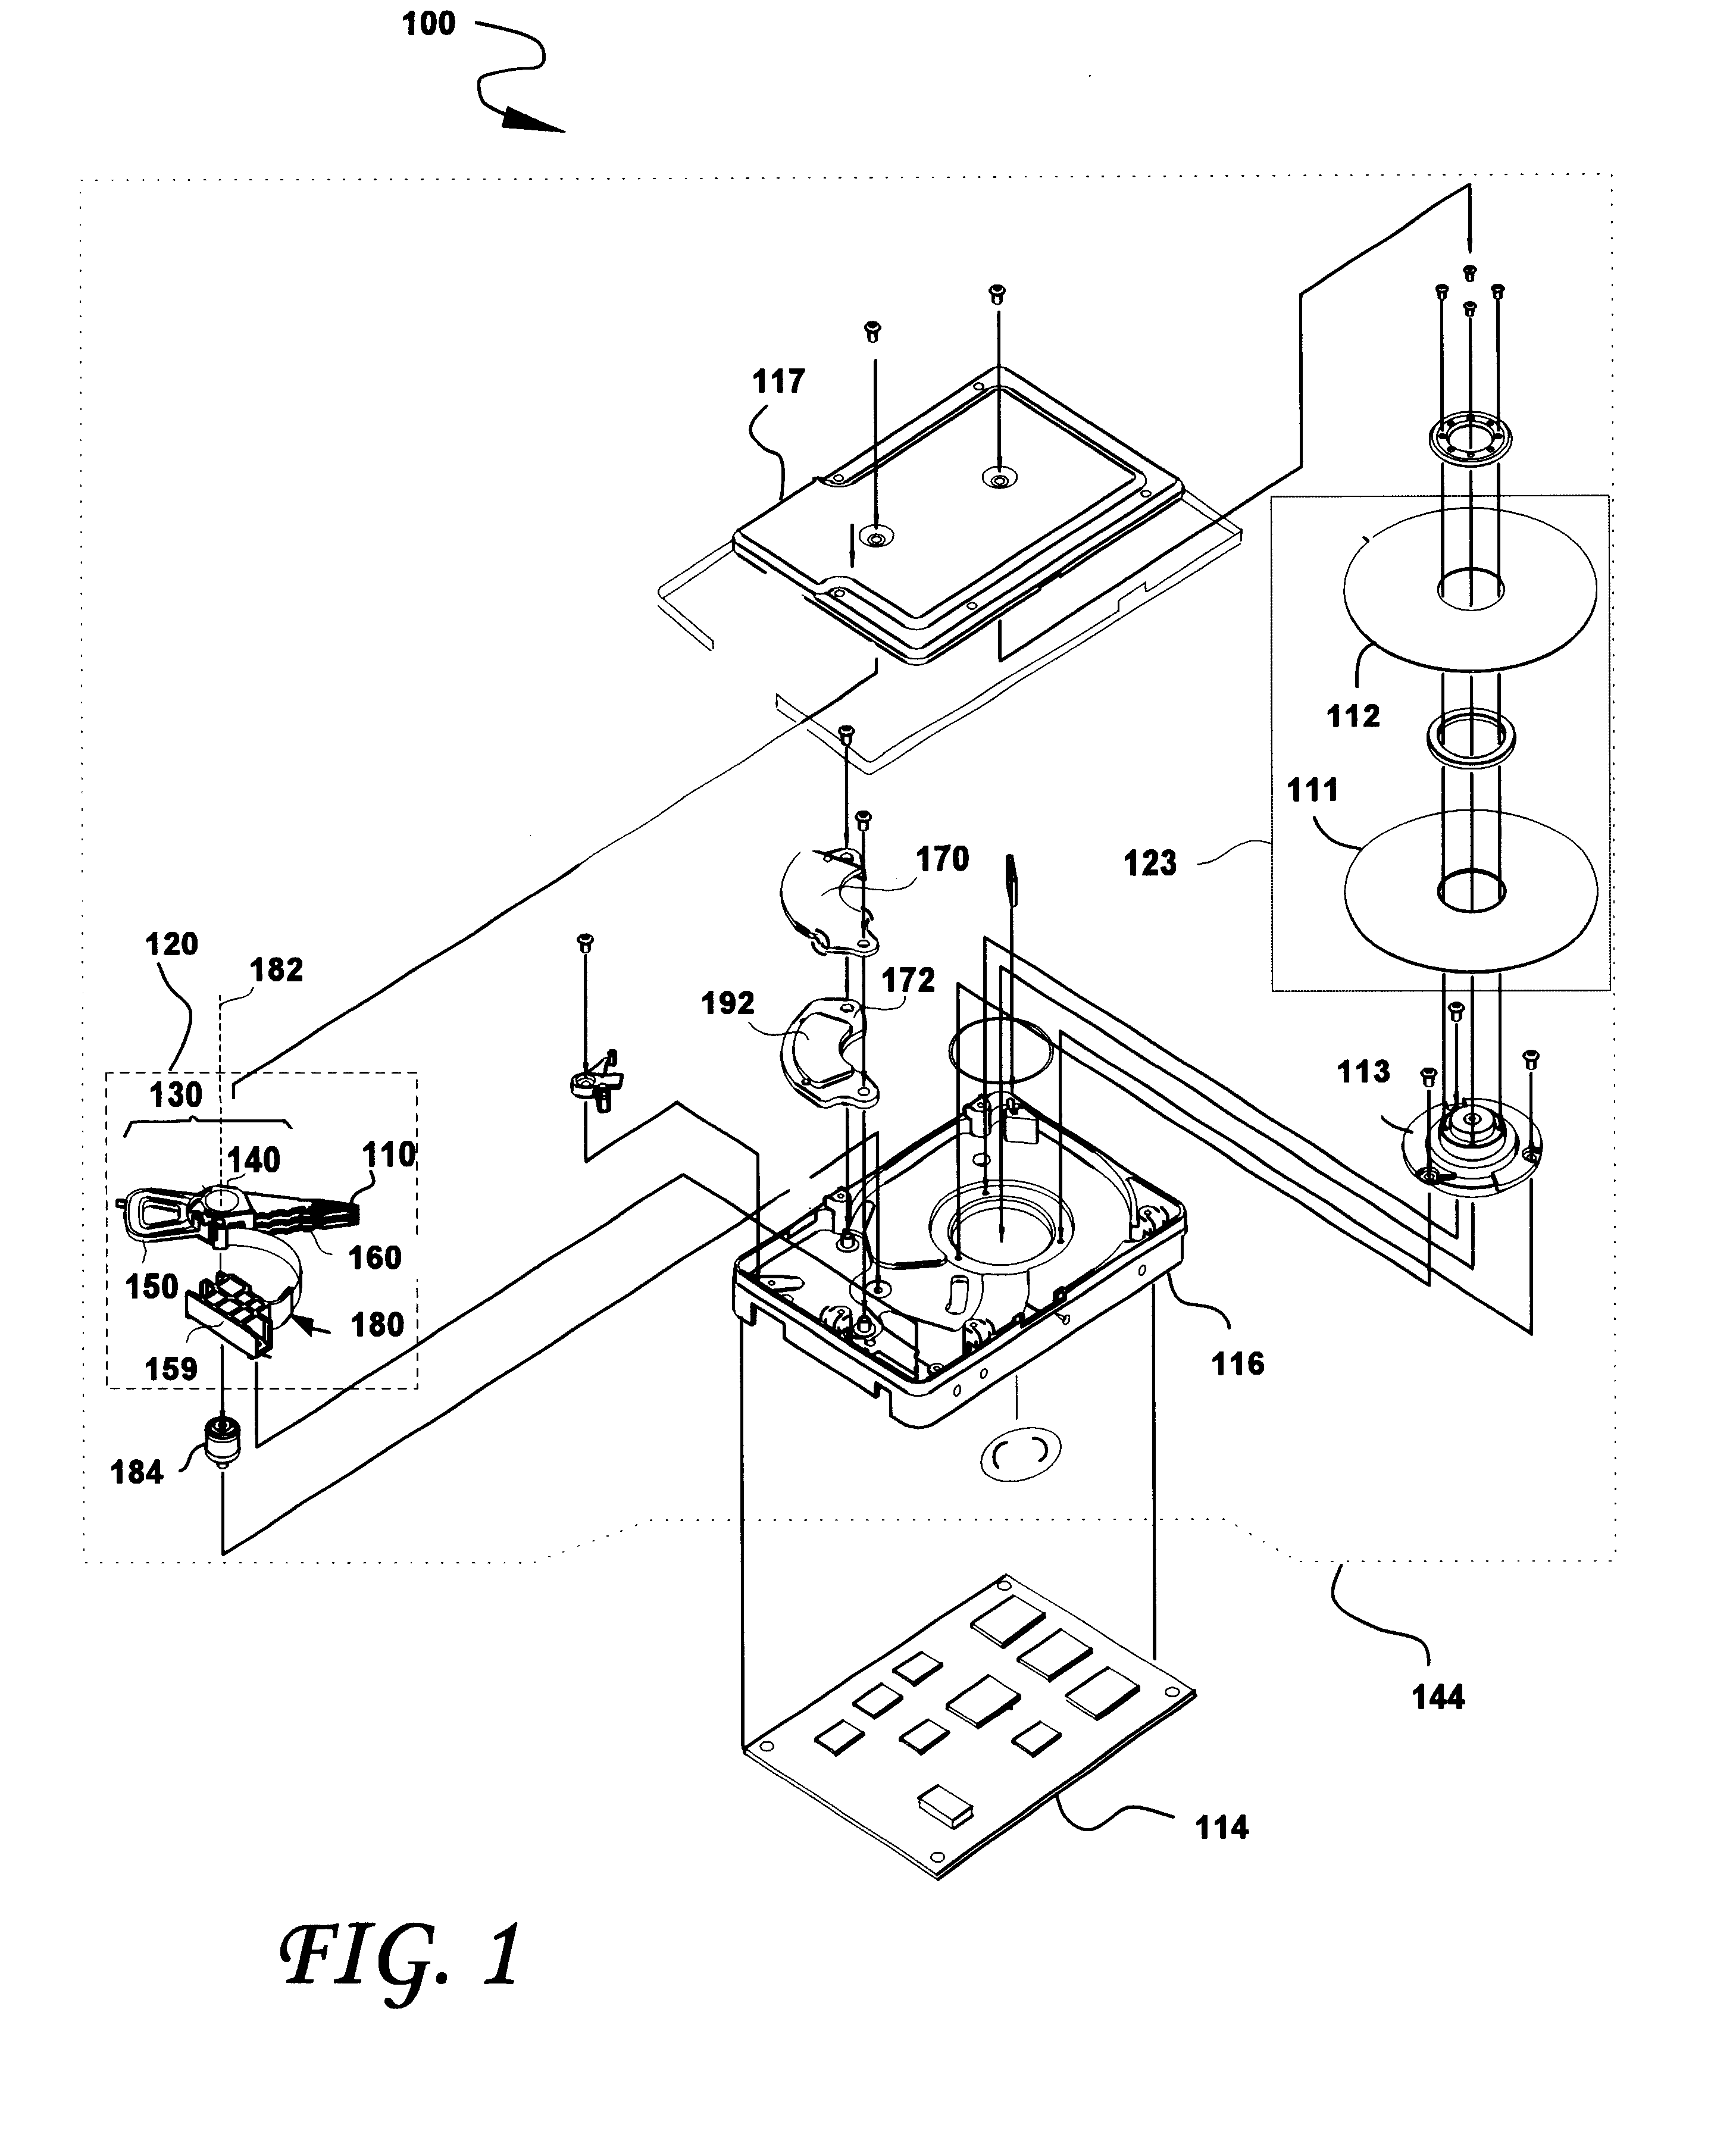 Disk drive having a low inertia and narrow angle coil